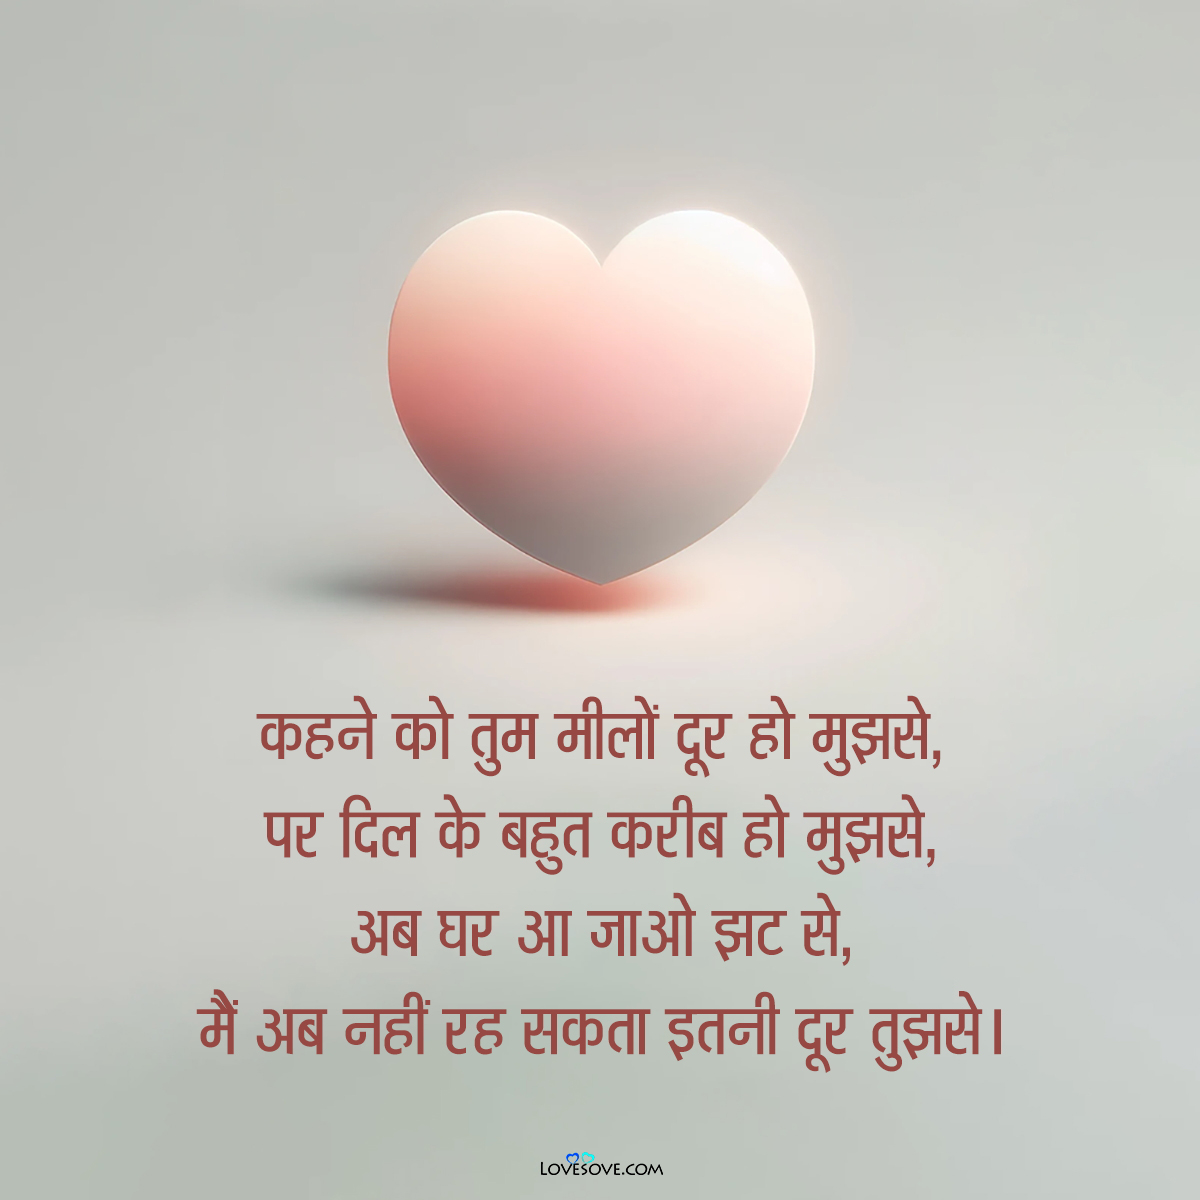 100+ heart touching miss you shayari, miss you quotes for parents in hindi